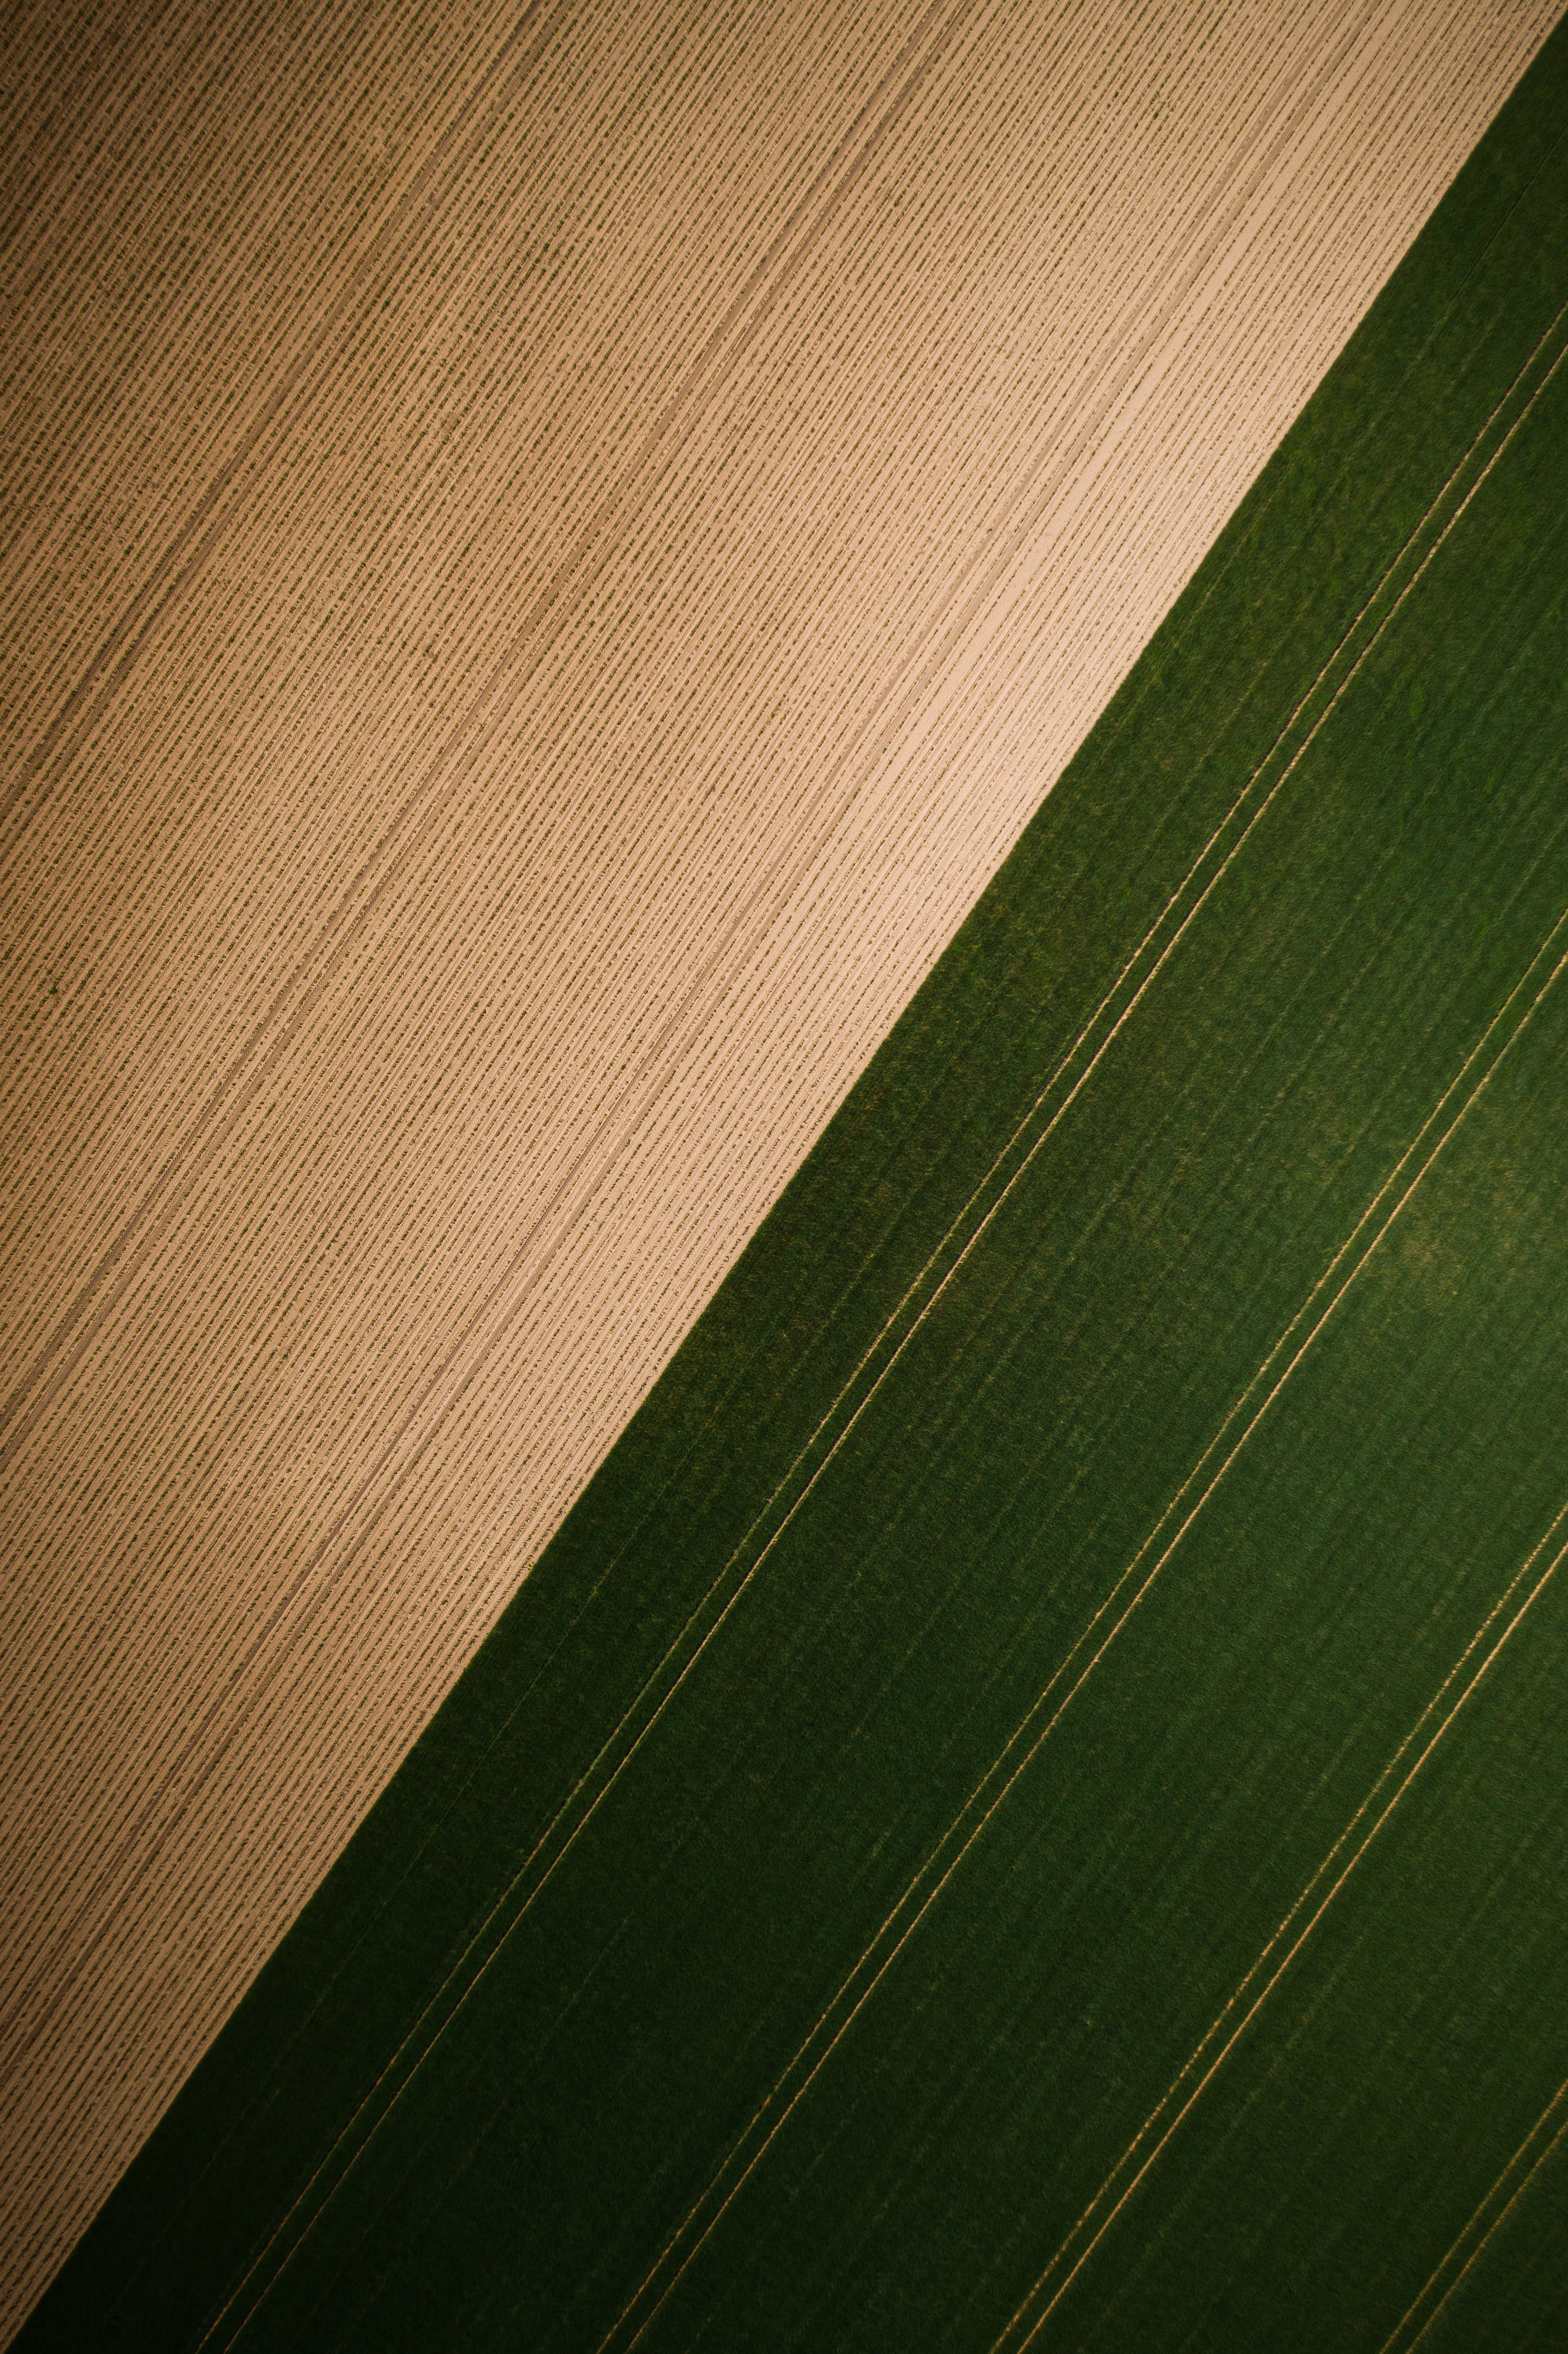 streaks, stripes, textures, grass, view from above, texture, field 5K